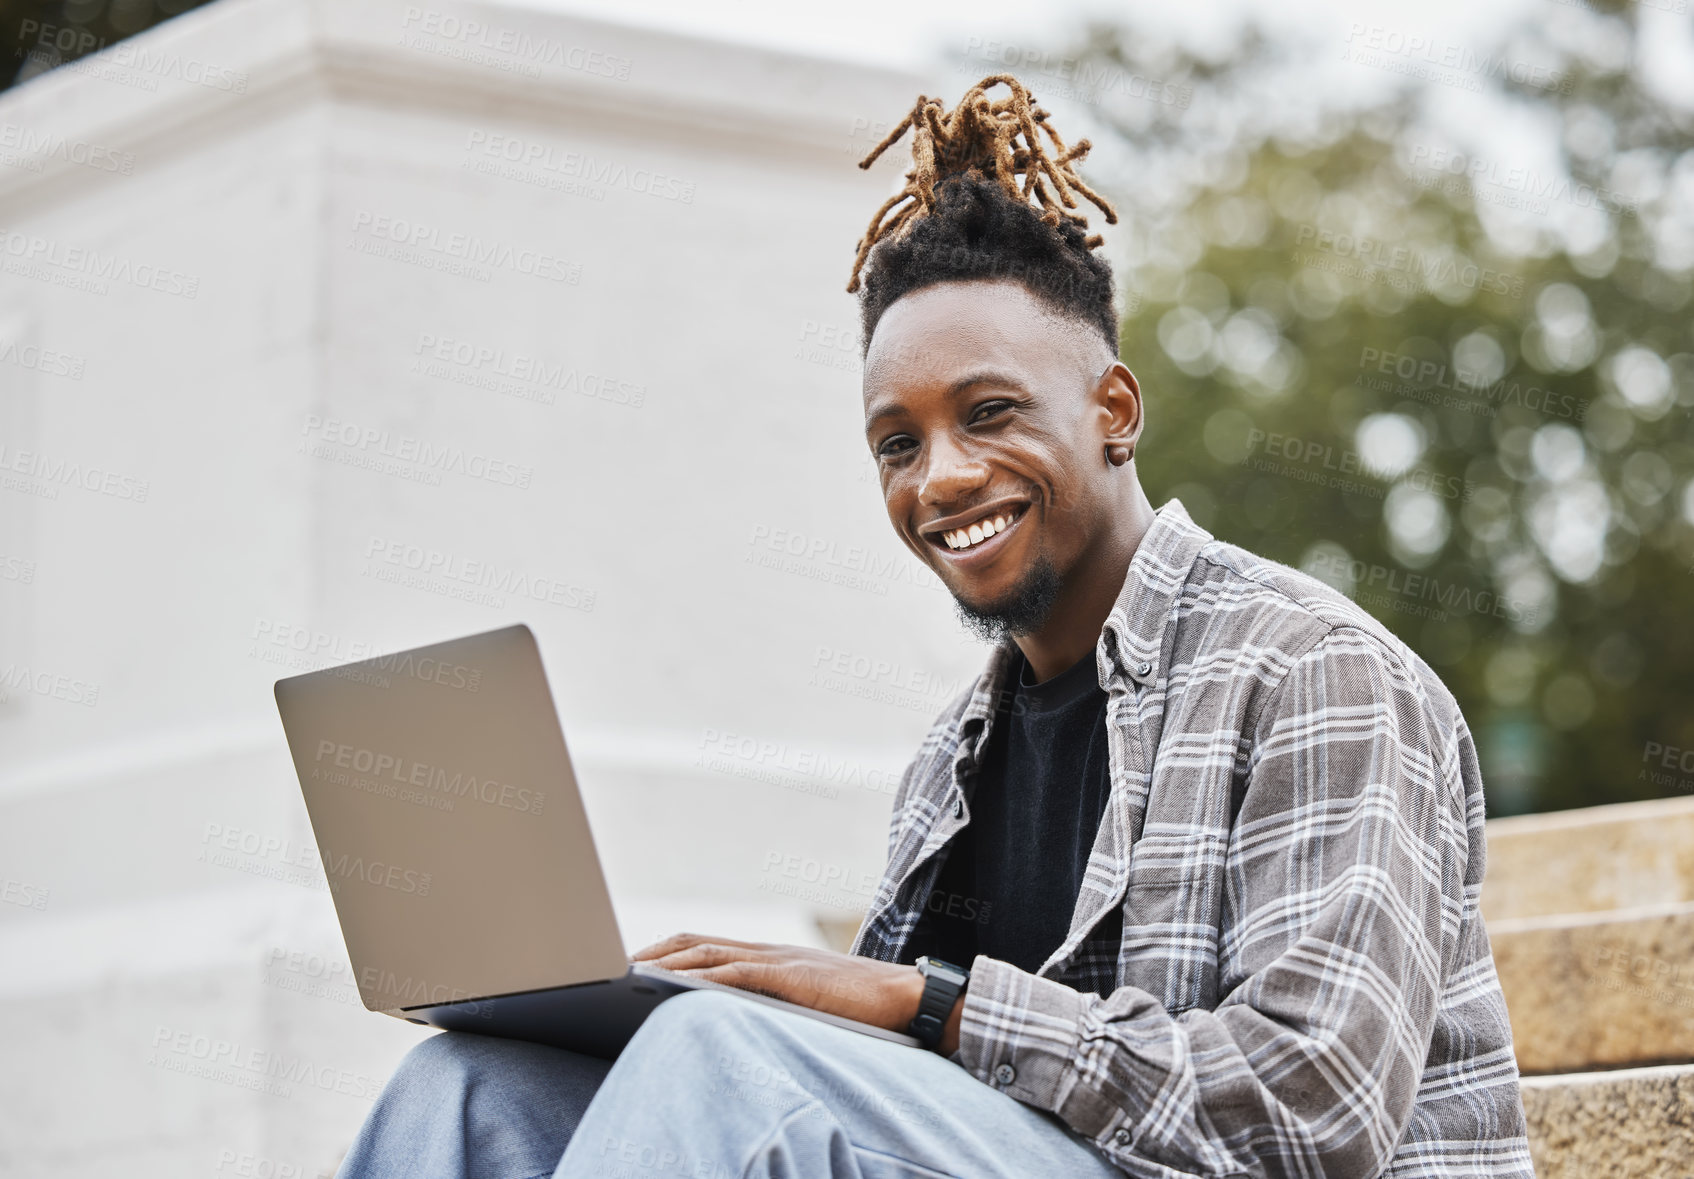 Buy stock photo Shot of a young man using a laptop on campus